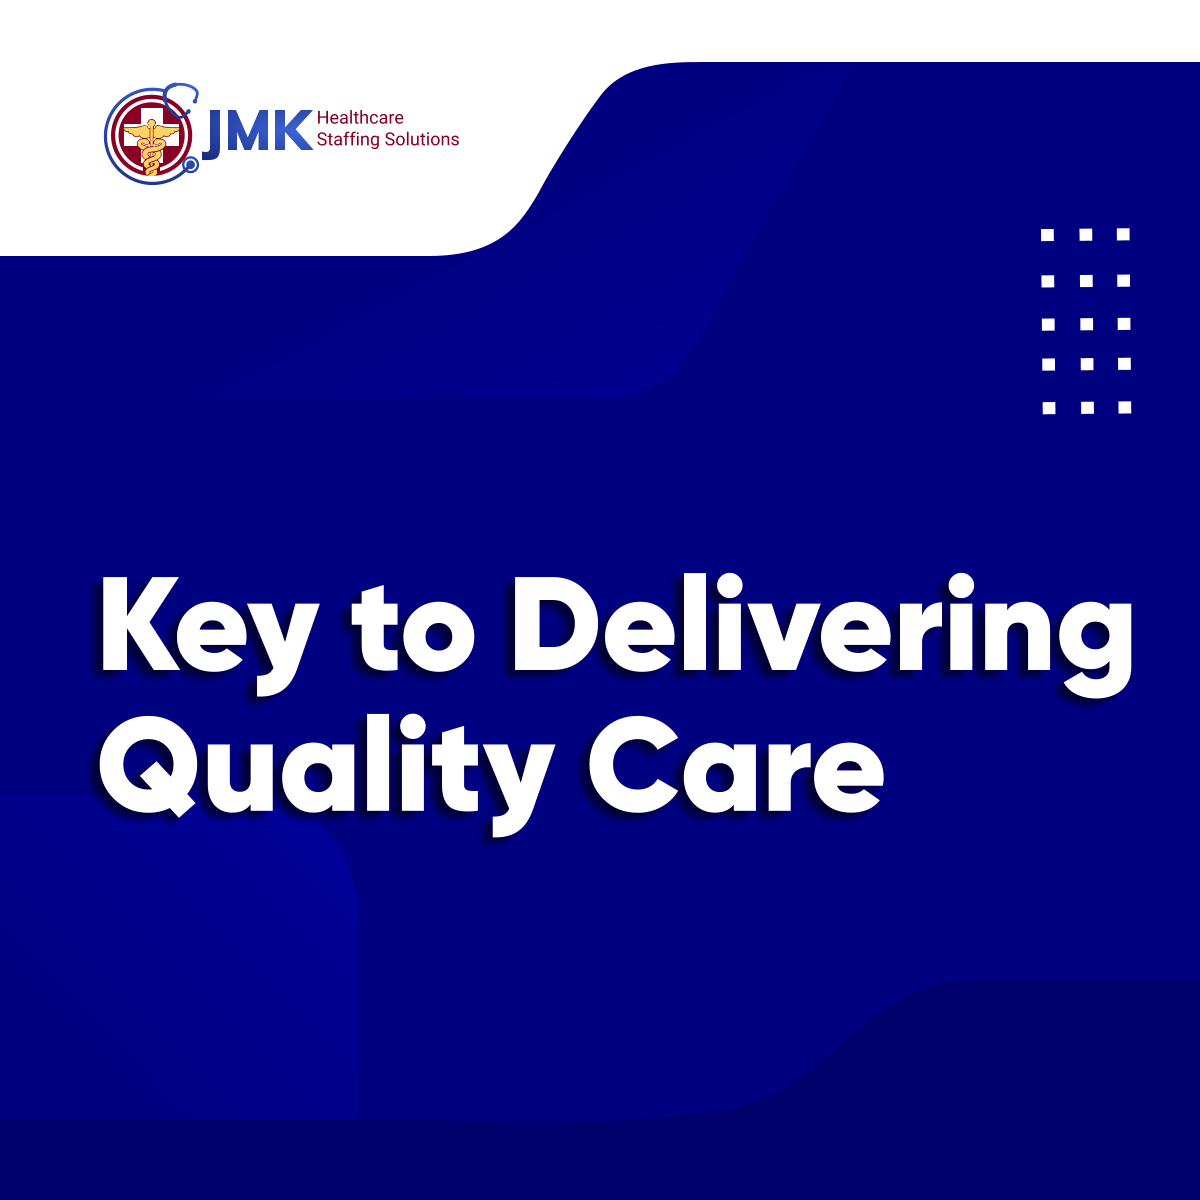 Proper staffing levels are critical to ensuring quality patient care. Understaffing can lead to burnout, mistakes, and poor outcomes. We help to ensure optimal staffing levels.

#HealthcareStaffing #QualityCare